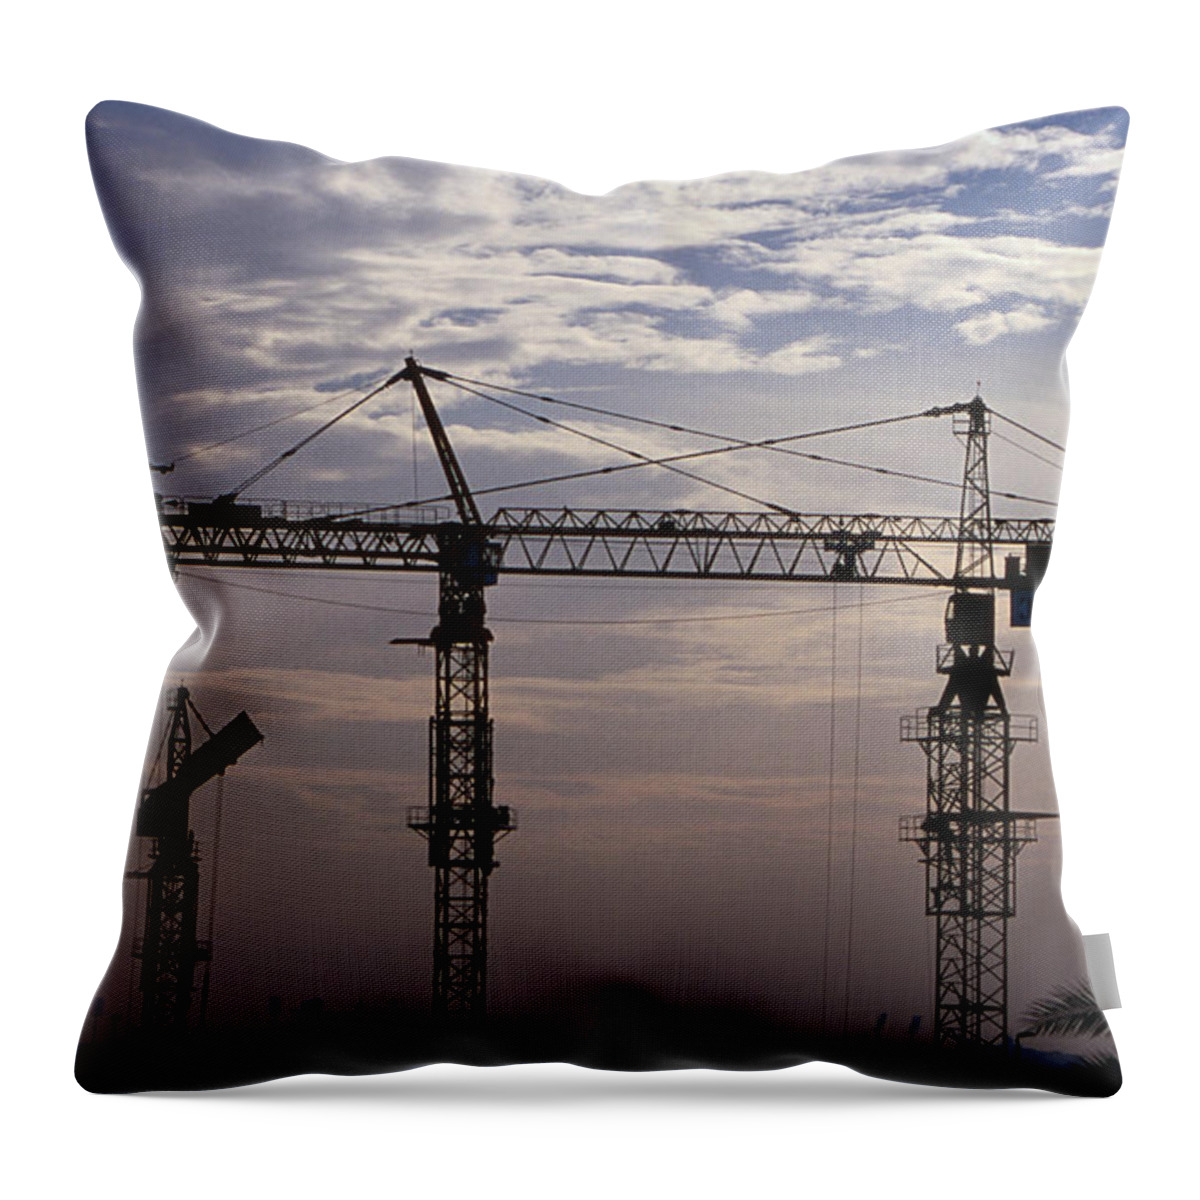 Outdoors Throw Pillow featuring the photograph Construction Site Cranes At Sunset by Lonely Planet